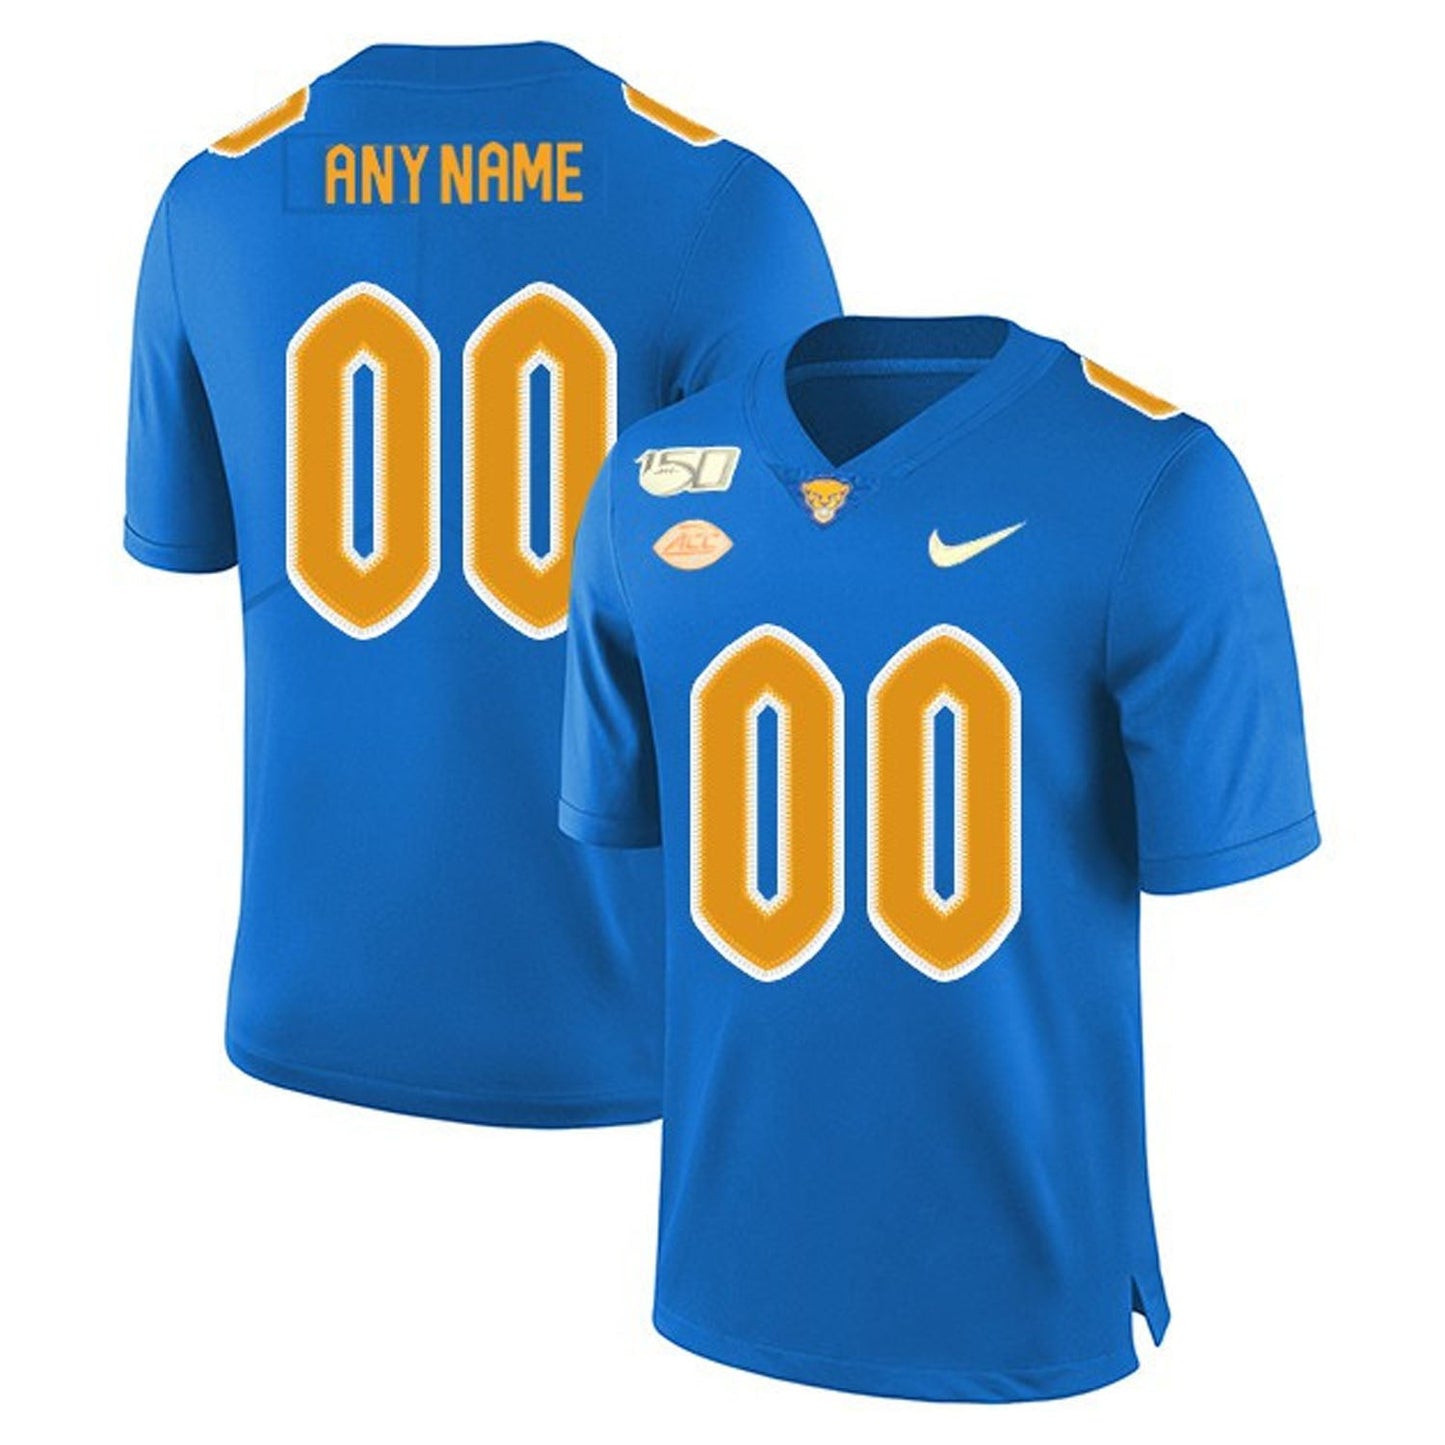 NCAAF Pittsburgh Panthers Custom Jersey